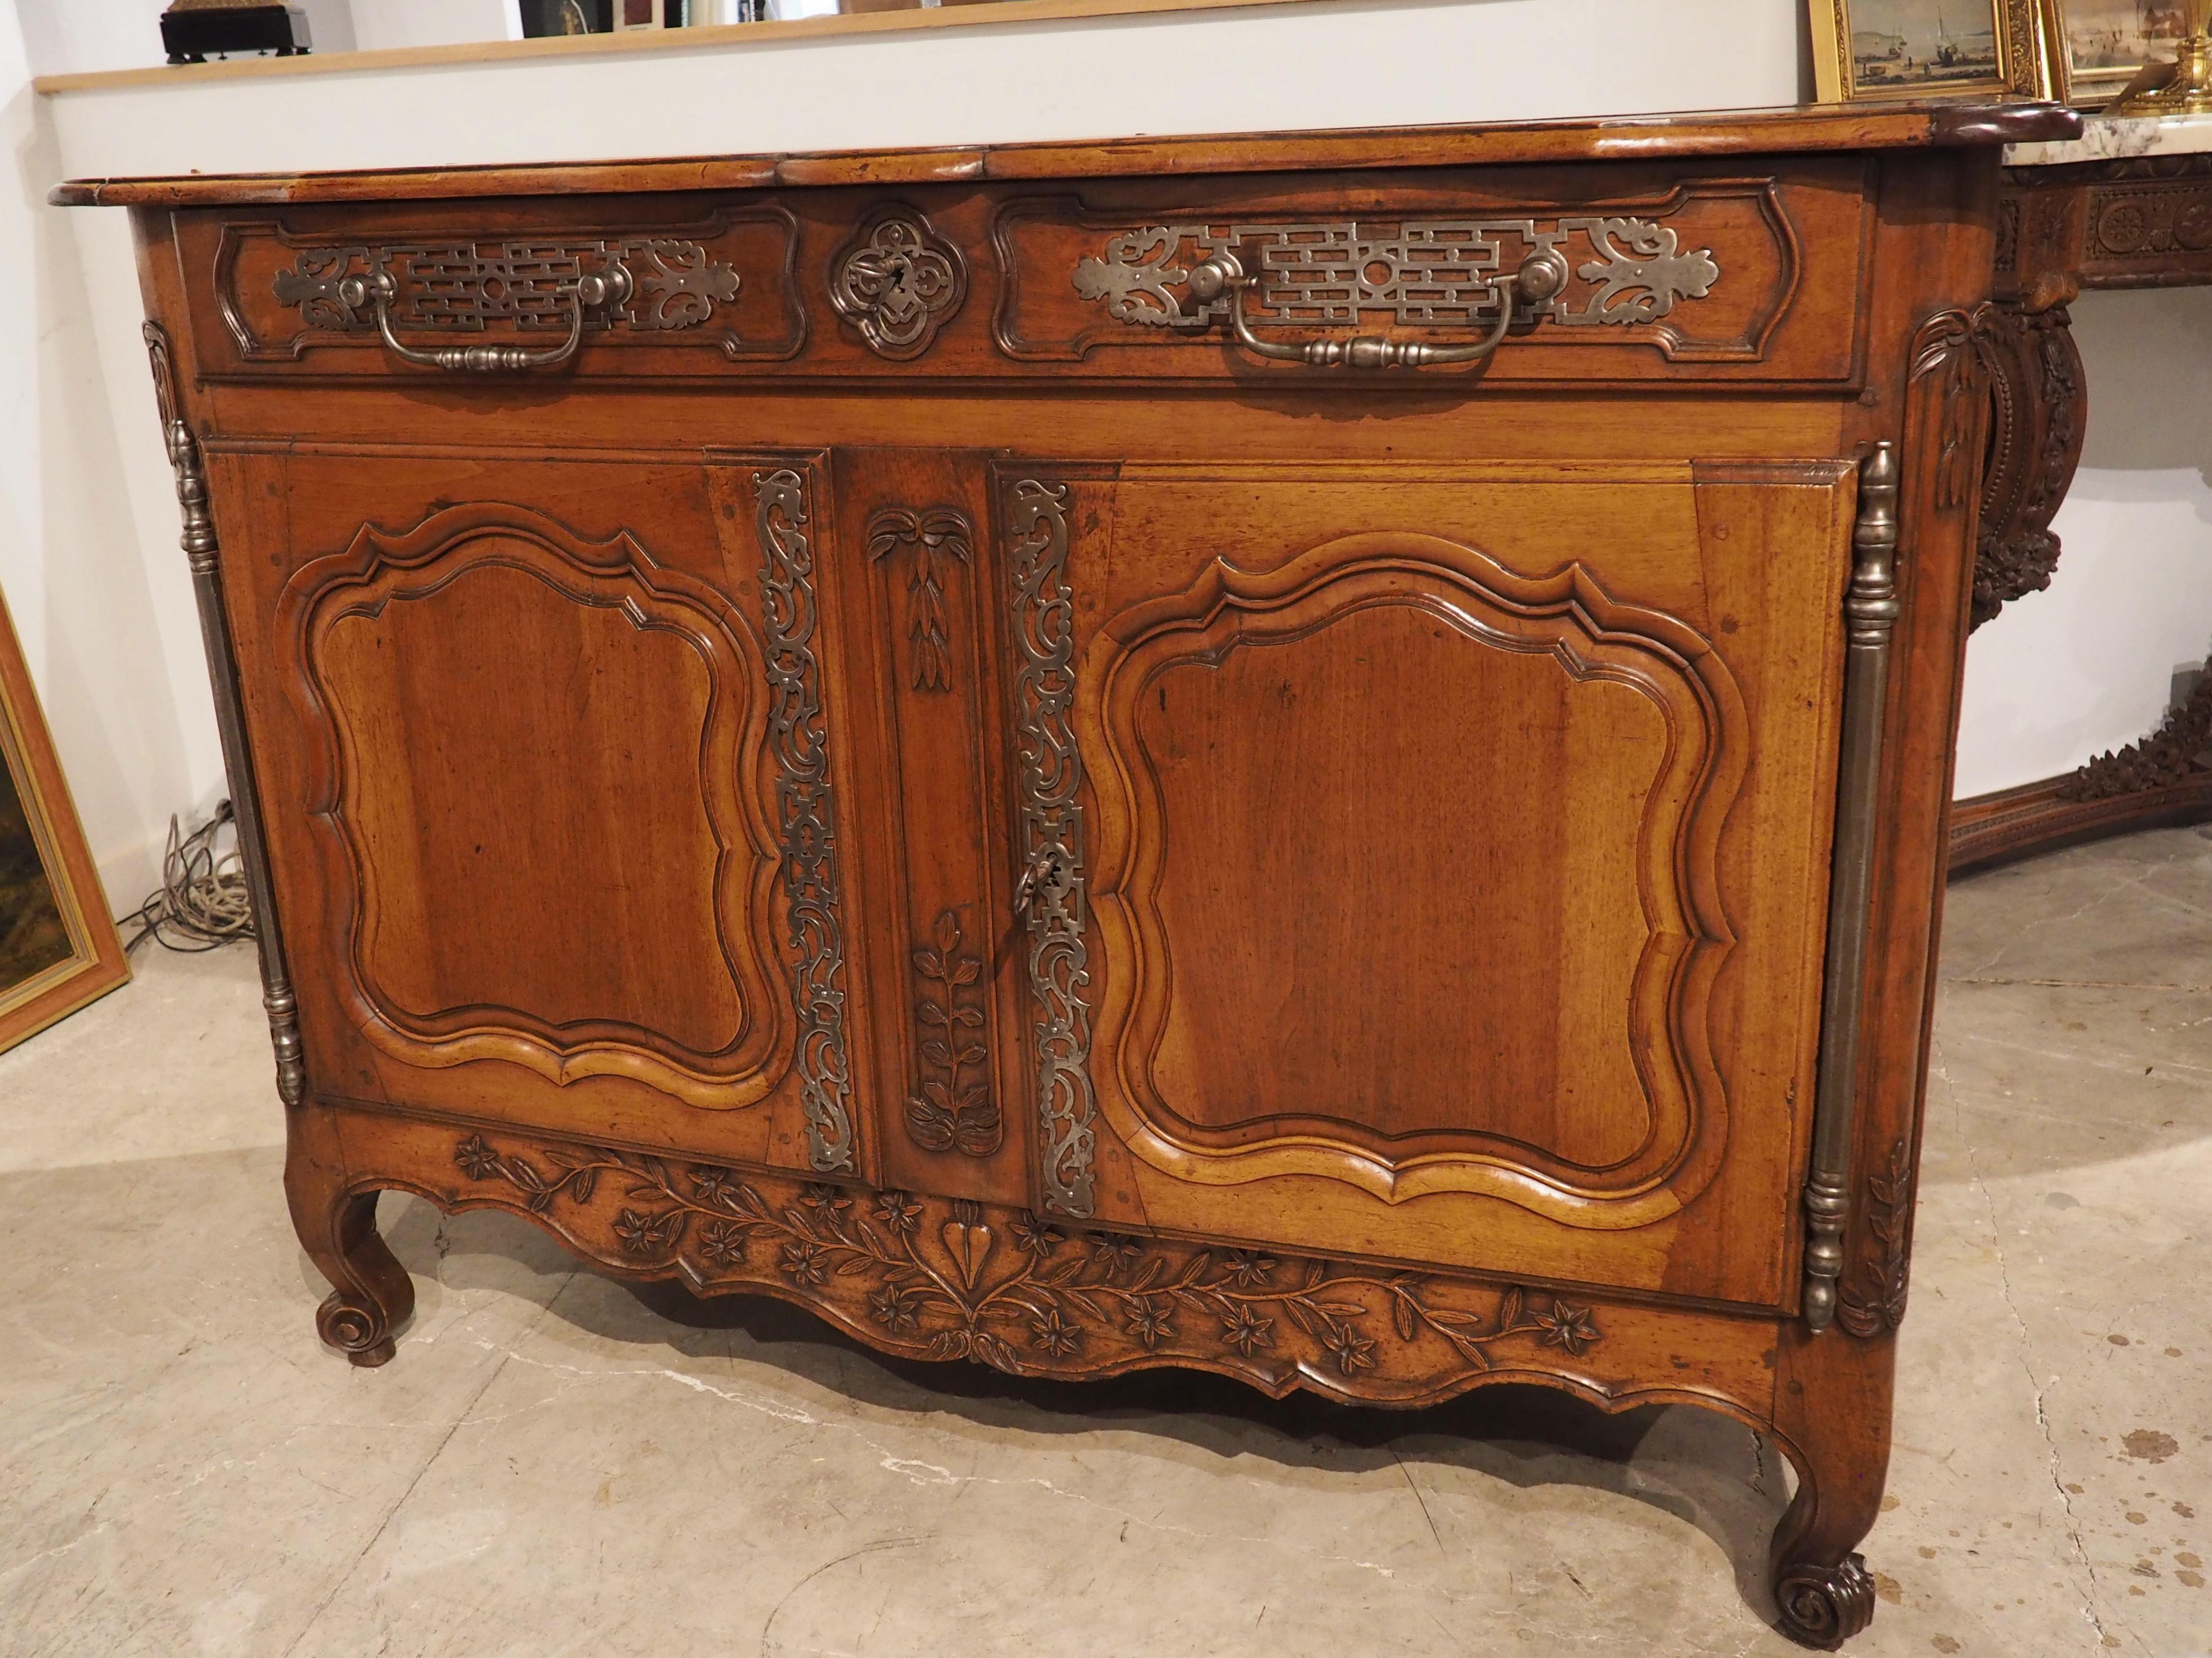 Hand-Carved 18th Century Louis XV Walnut Wood Buffet from Provence, France